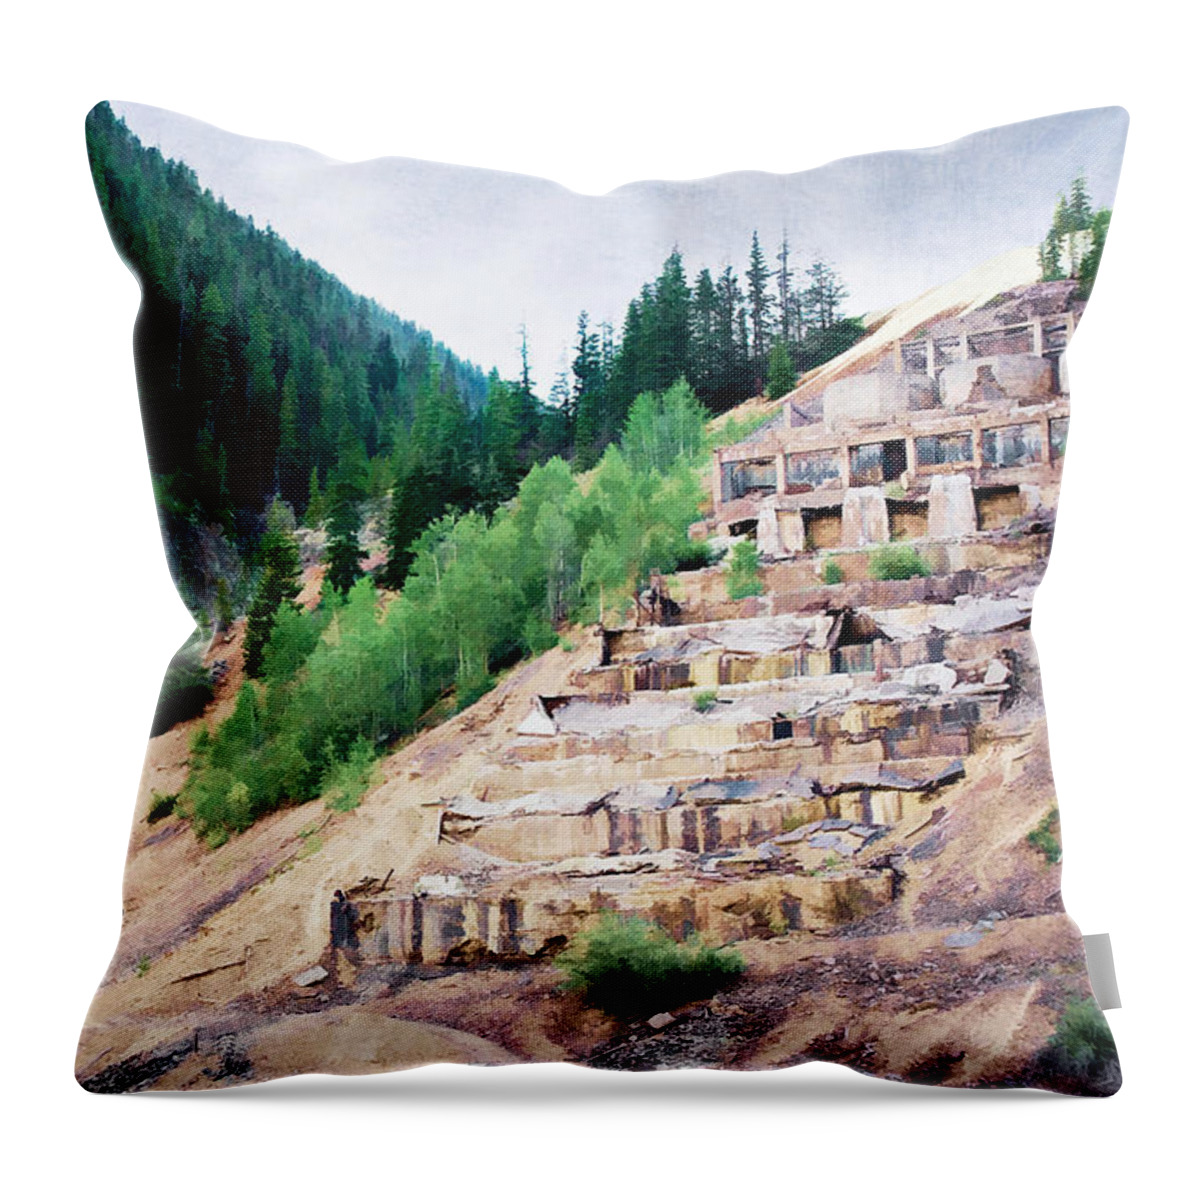 Colorado Throw Pillow featuring the photograph Leftovers from Sunnyside Mill by Lana Trussell